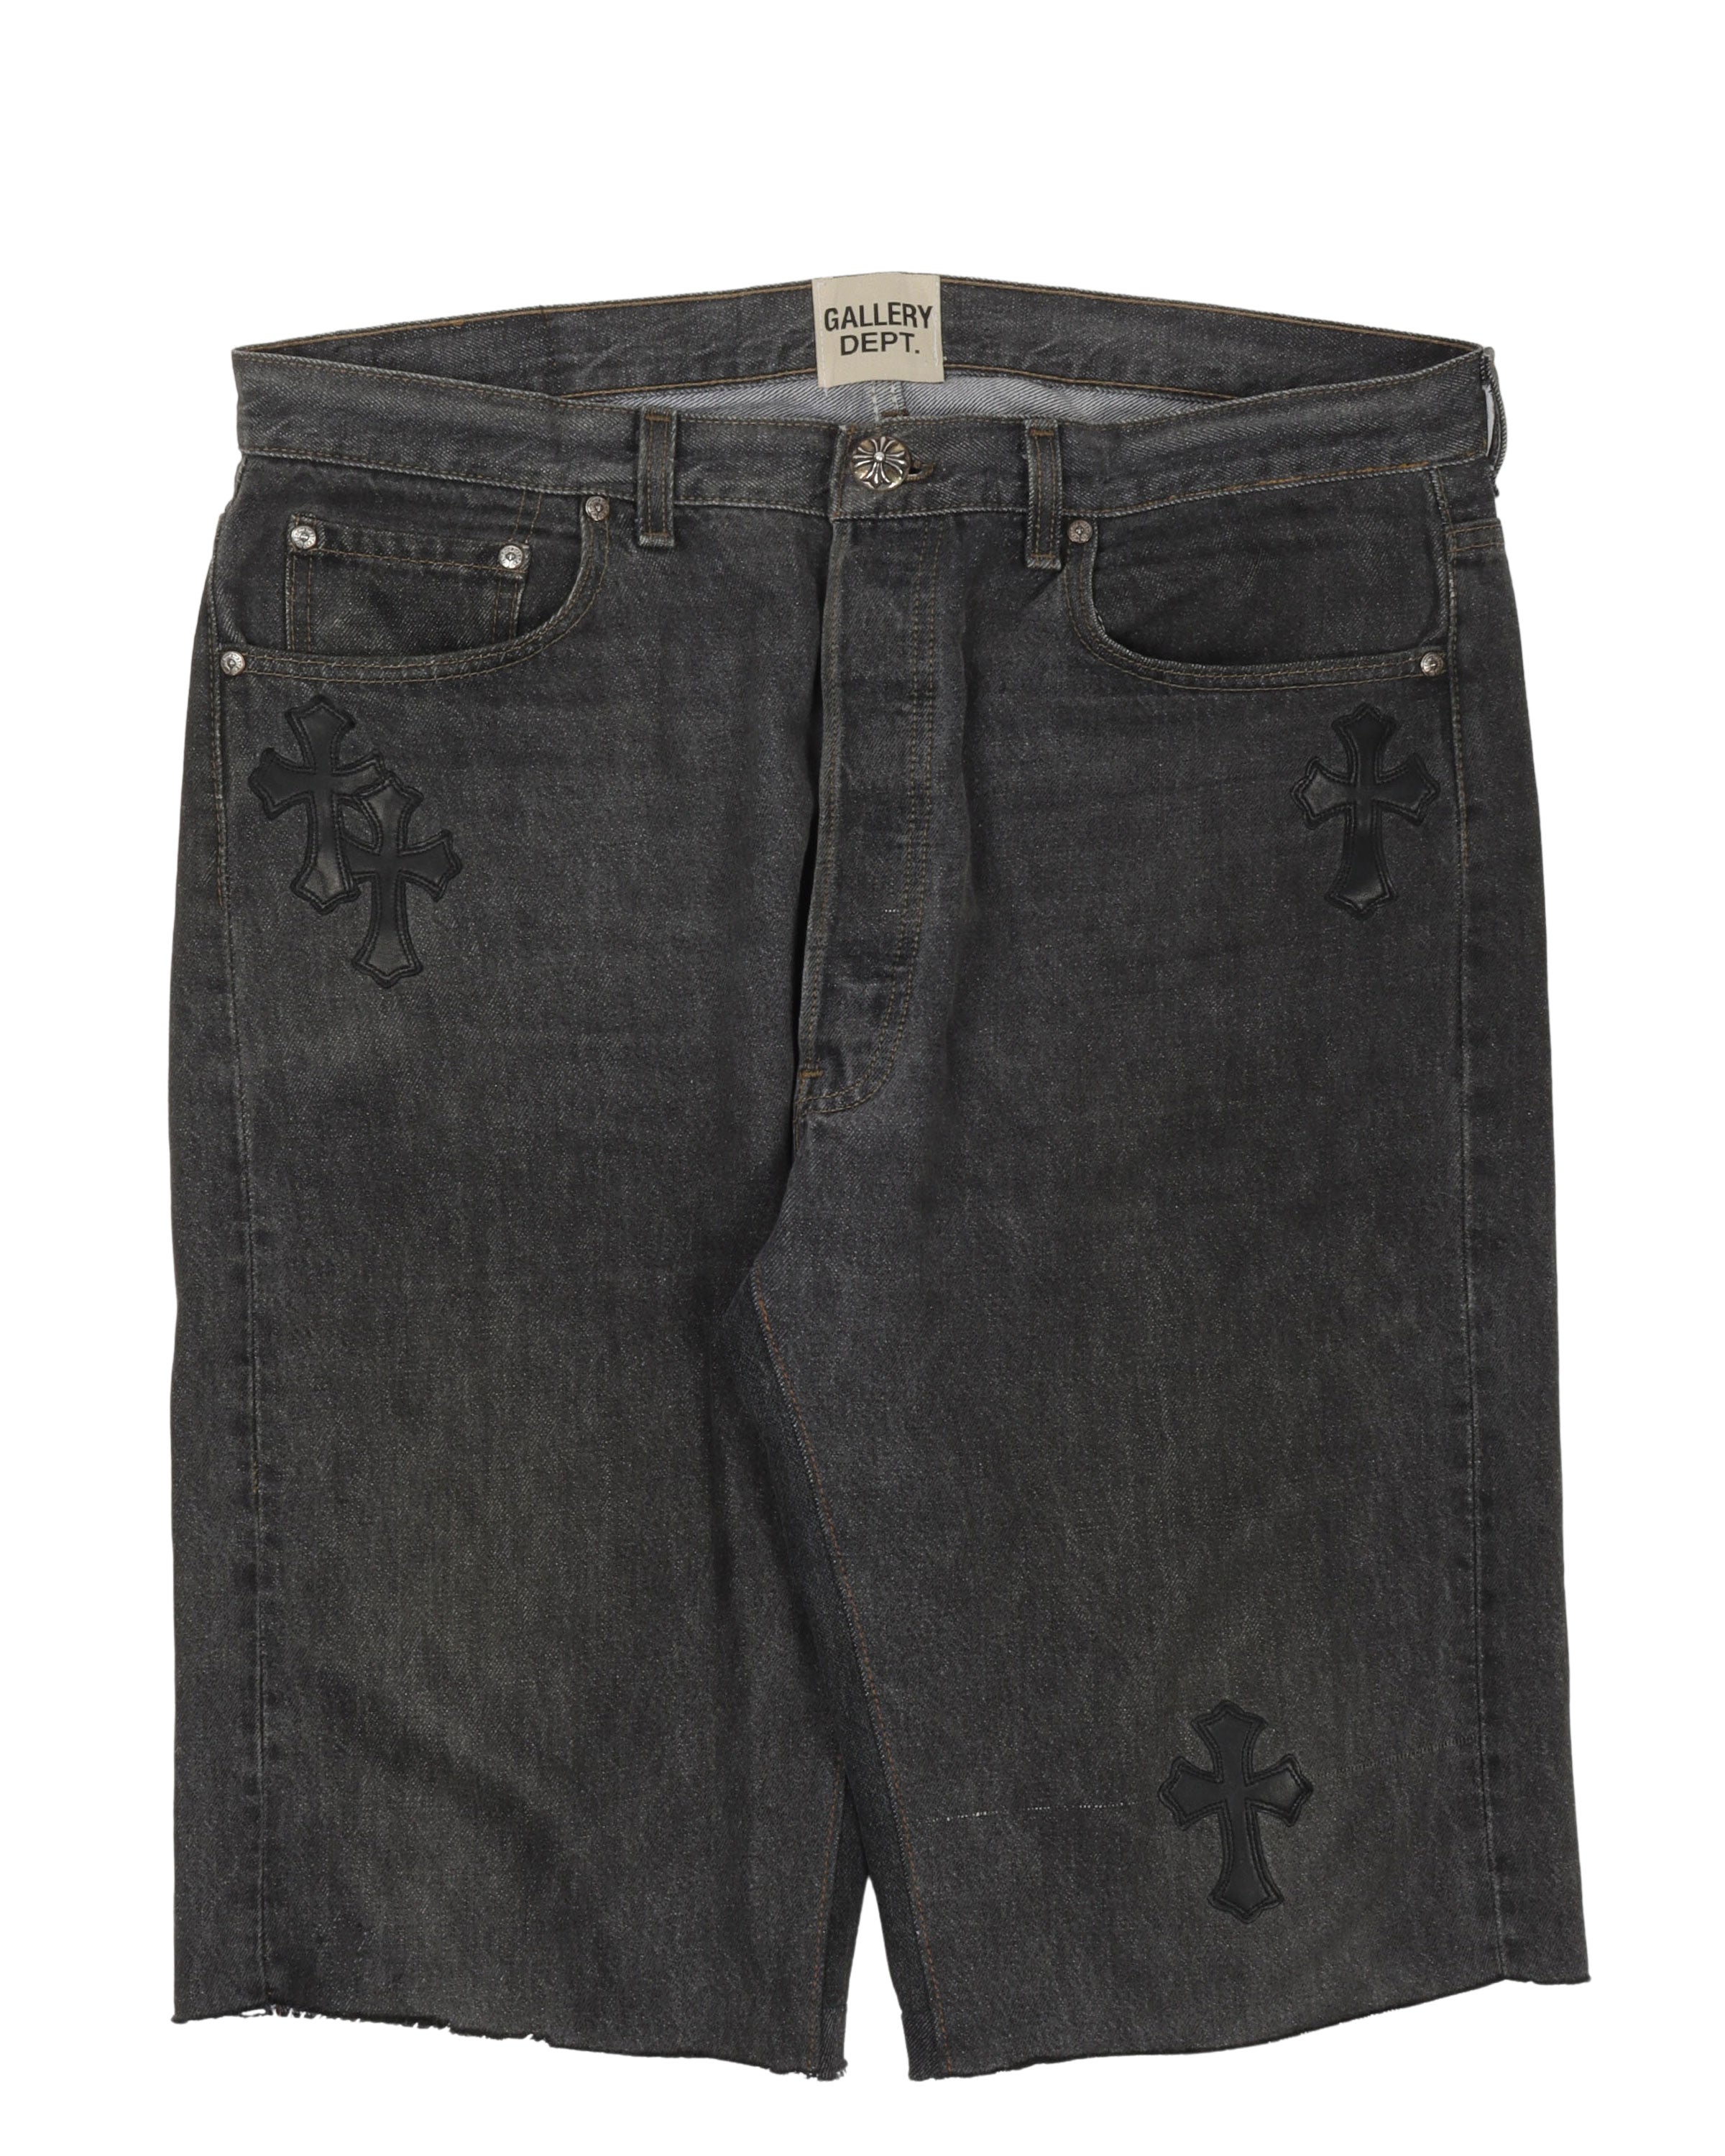 Chrome Hearts Chopped Gallery Dept. Jean Shorts